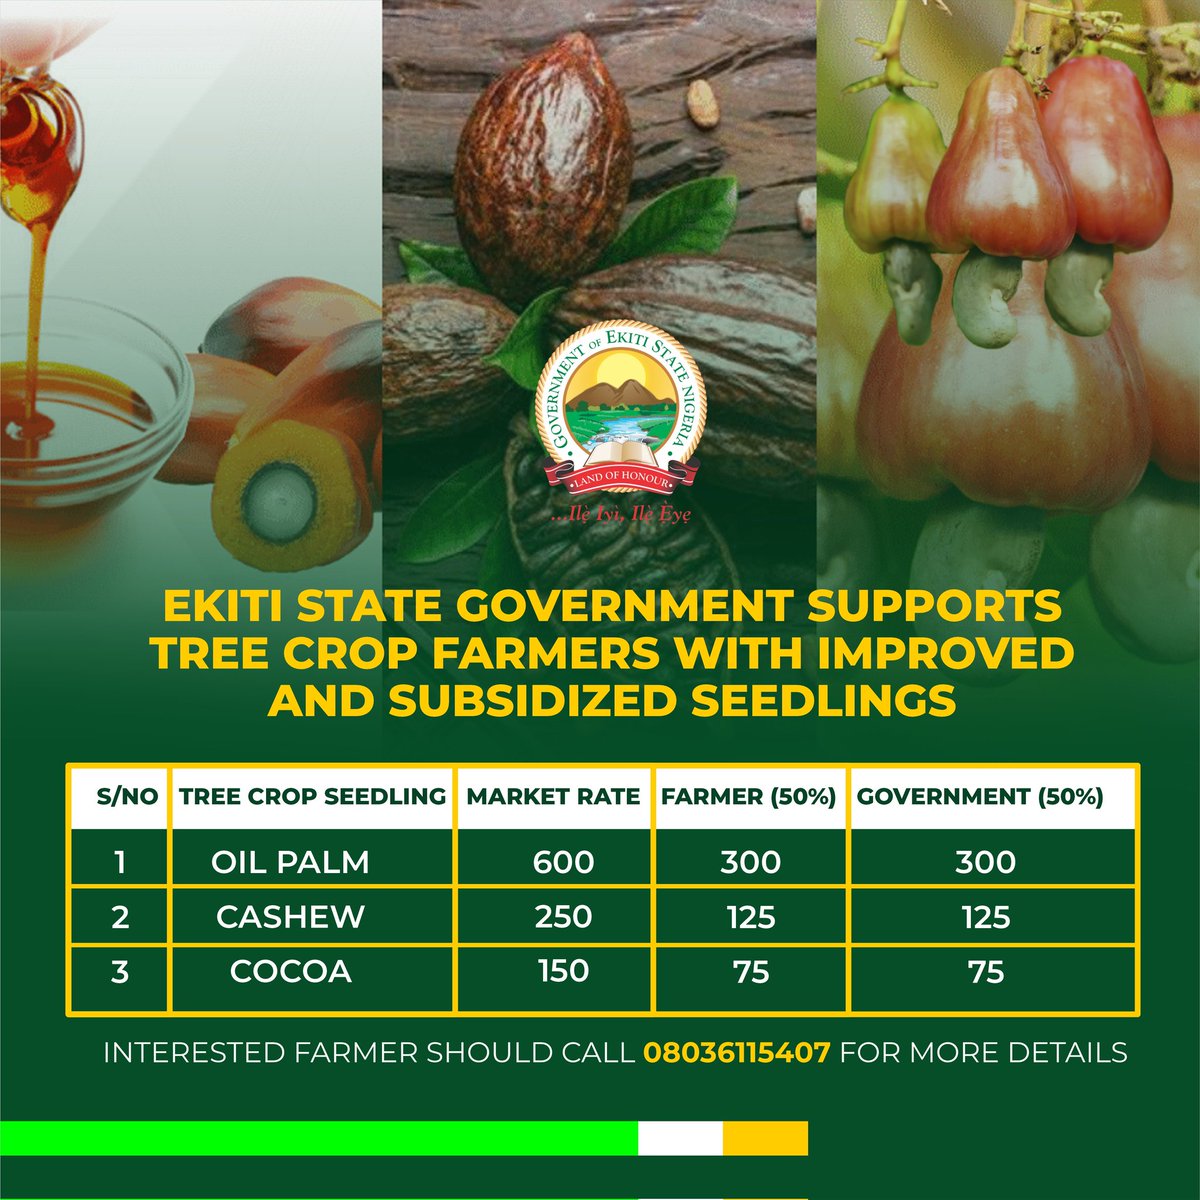 Ekiti State Government Approves 50% Subsidy for Improved Tree Crop Seedlings Governor Biodun Oyebanji has authorised a 50% subsidy on oil palm, cocoa, and cashew seedlings for distribution to farmers in Ekiti State this planting season. The initiative aims to revitalise tree